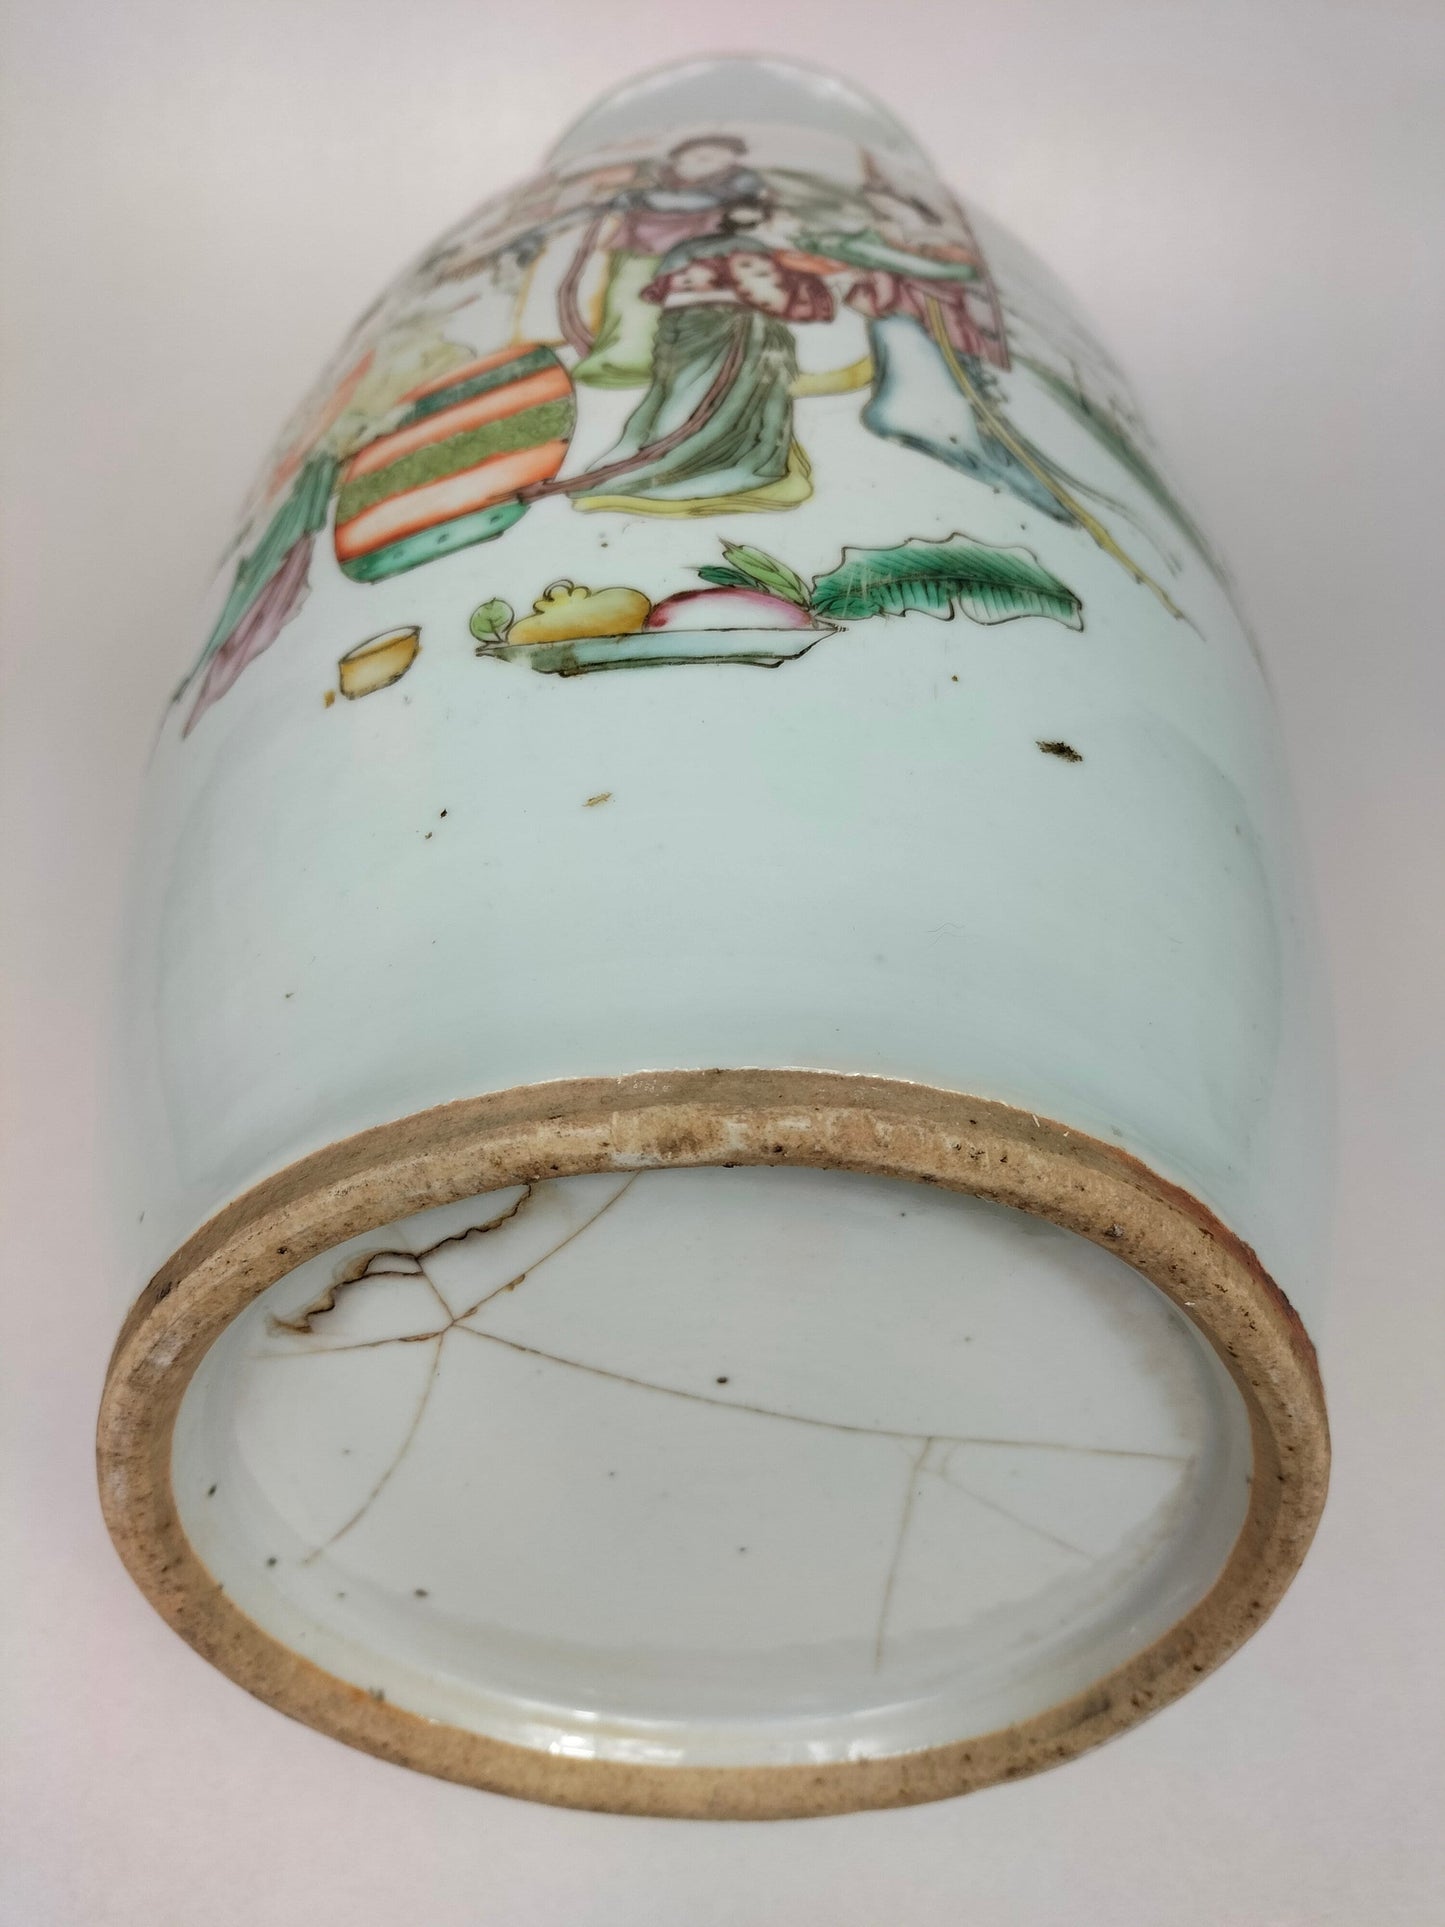 Large antique Chinese vase with a garden scene // Republic Period (1912-1949) #2